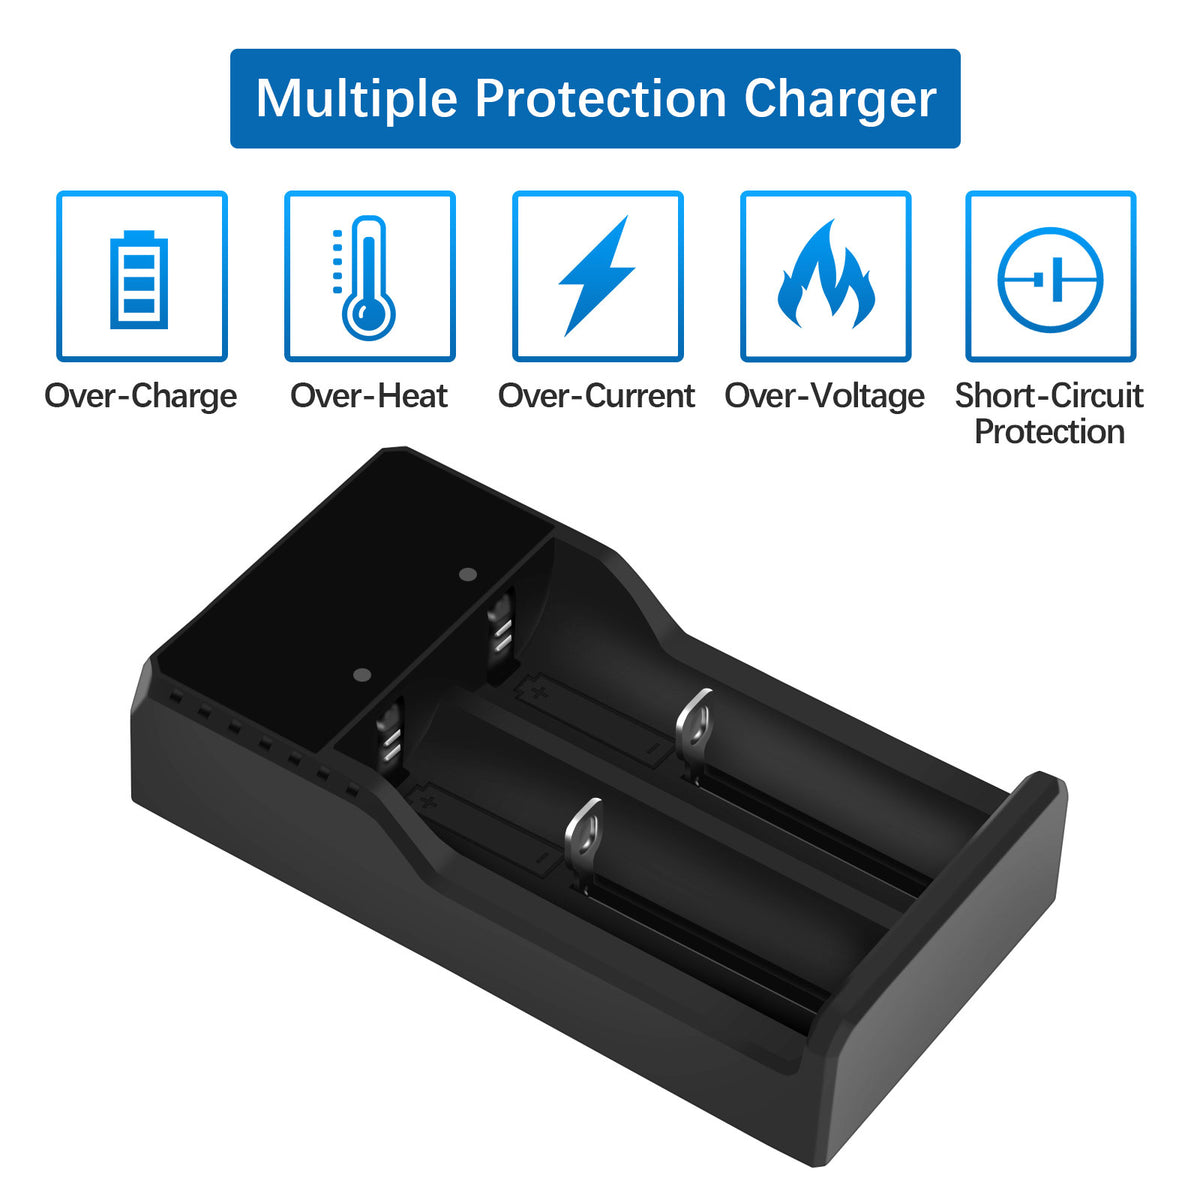 UltraFire Universal Multifunction Battery Charger DX-5 Pro